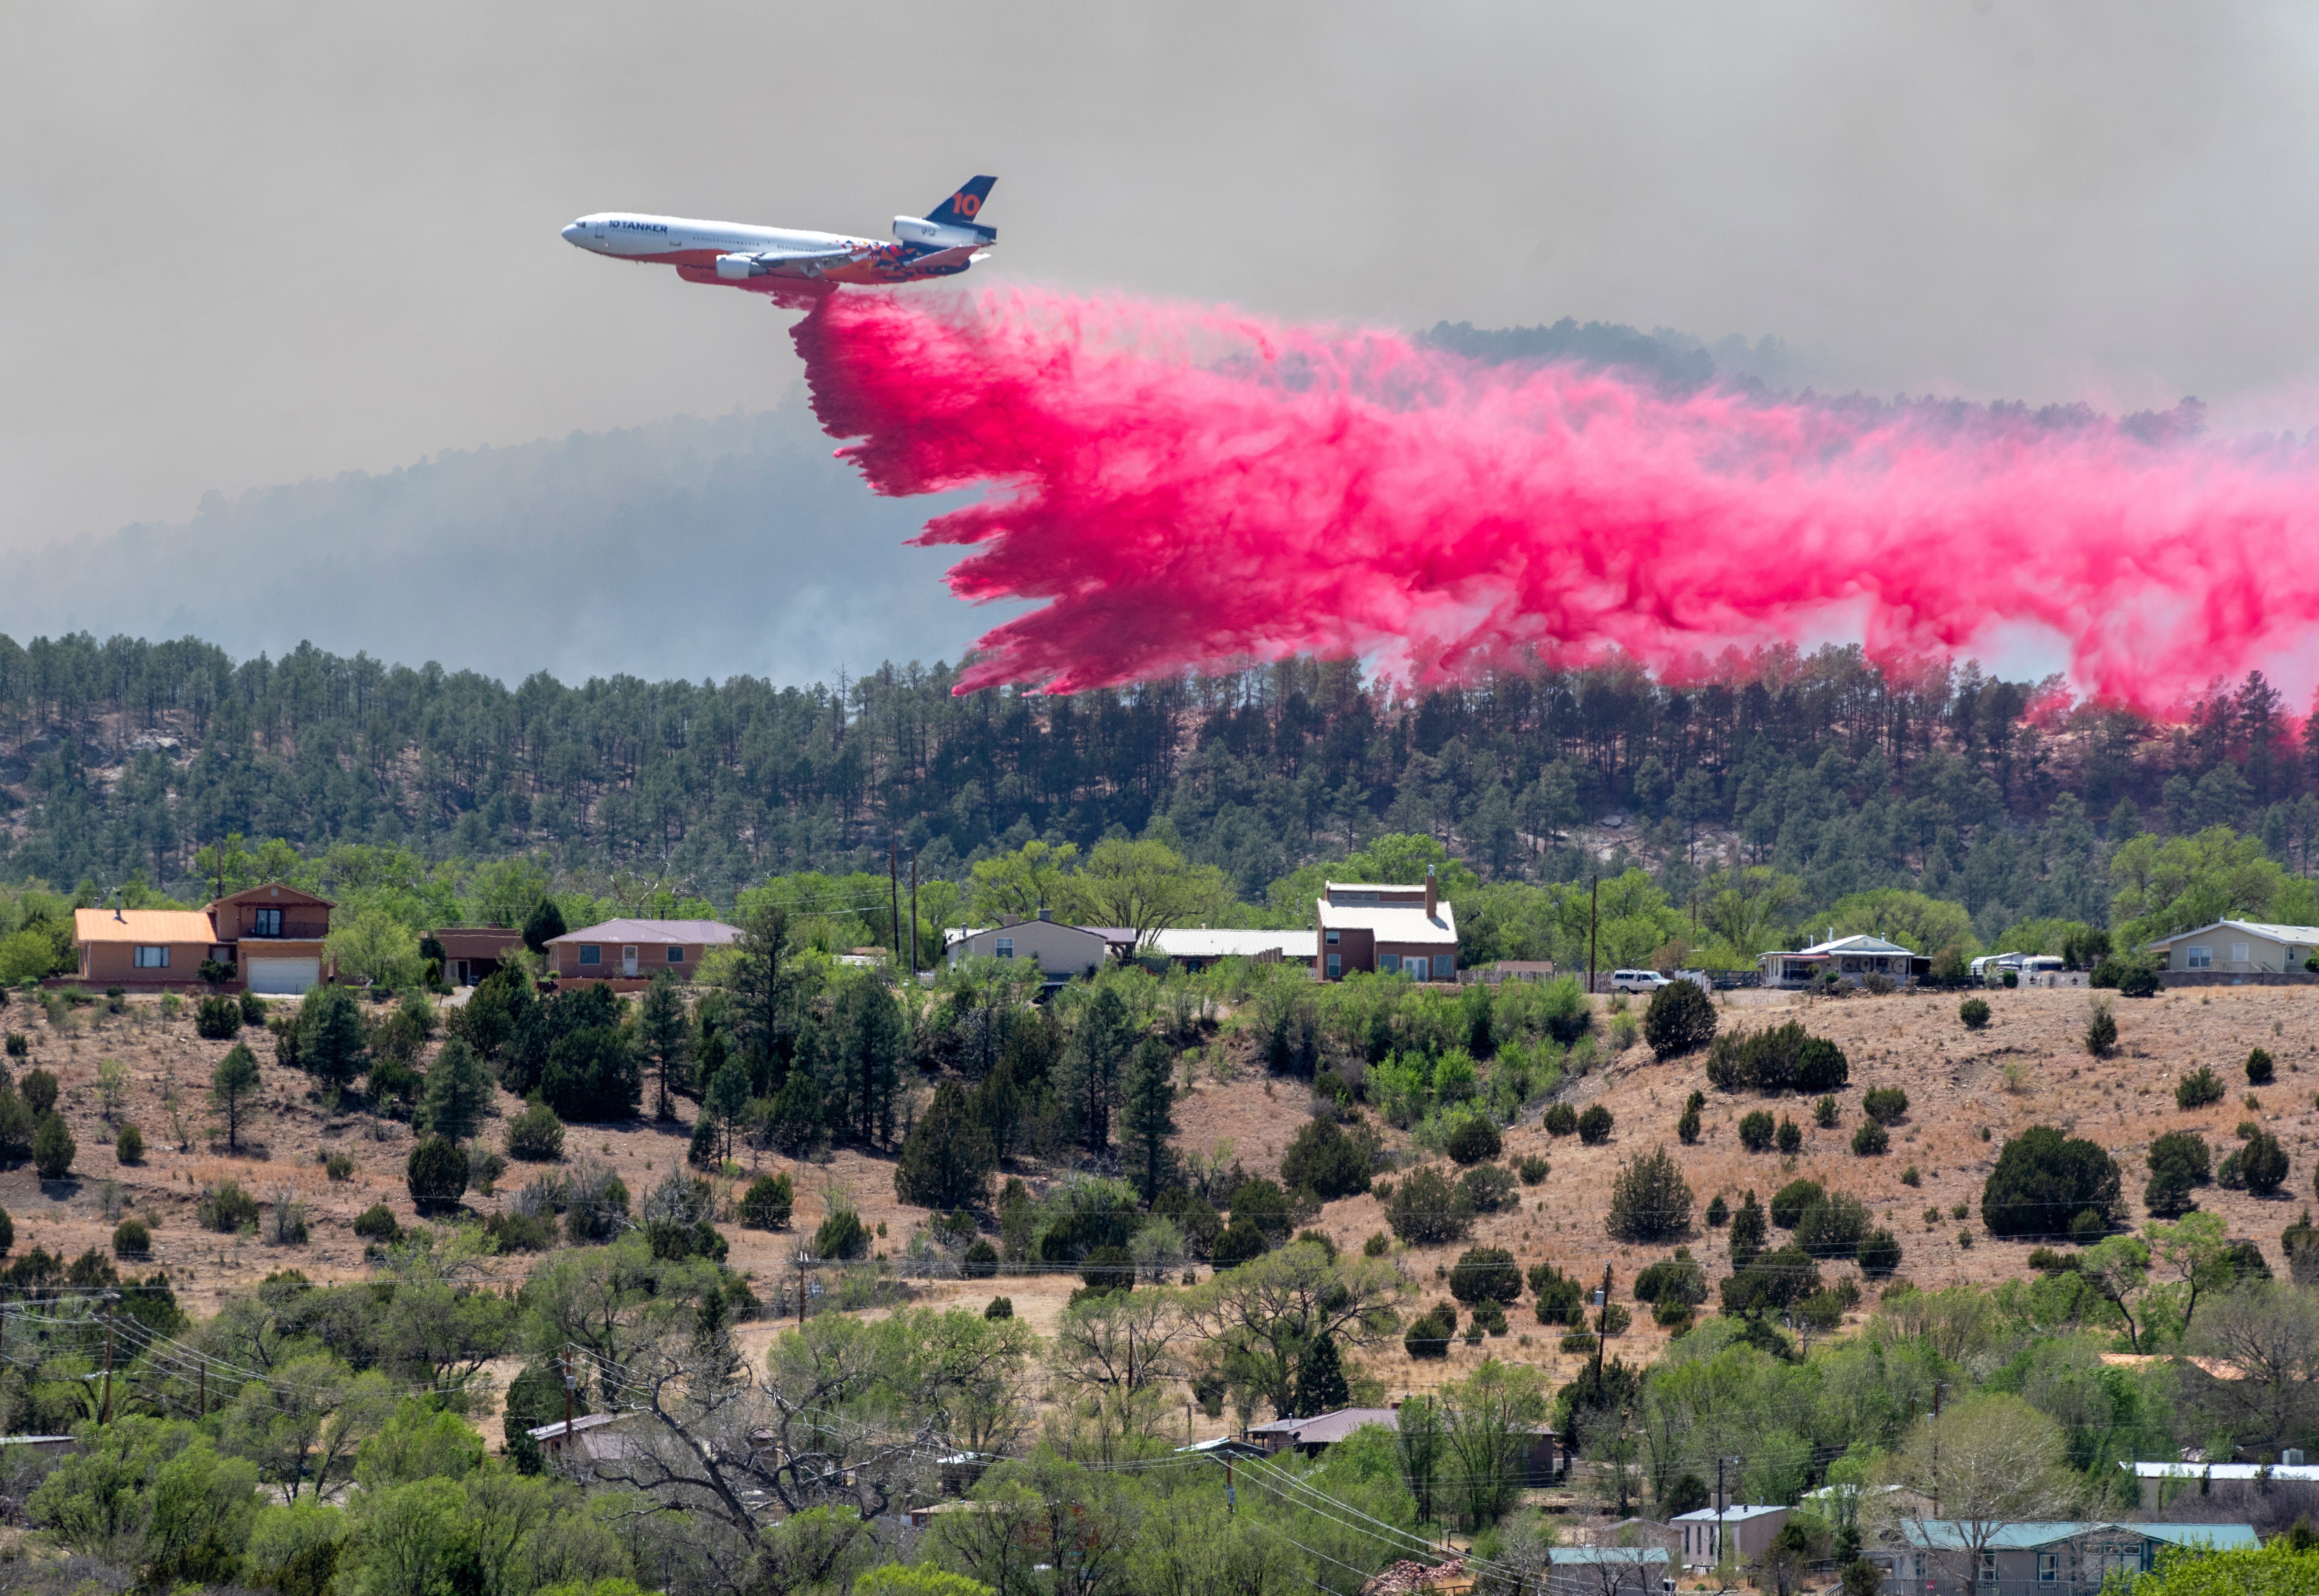 Firefighting aircraft like this slurry bomber (dropping fire retardant) are helping to keep the ongoing Calf Canyon/Hermits Peak fire from burning through Las Vegas, NM. (Photo: Eddie Moore, AP)